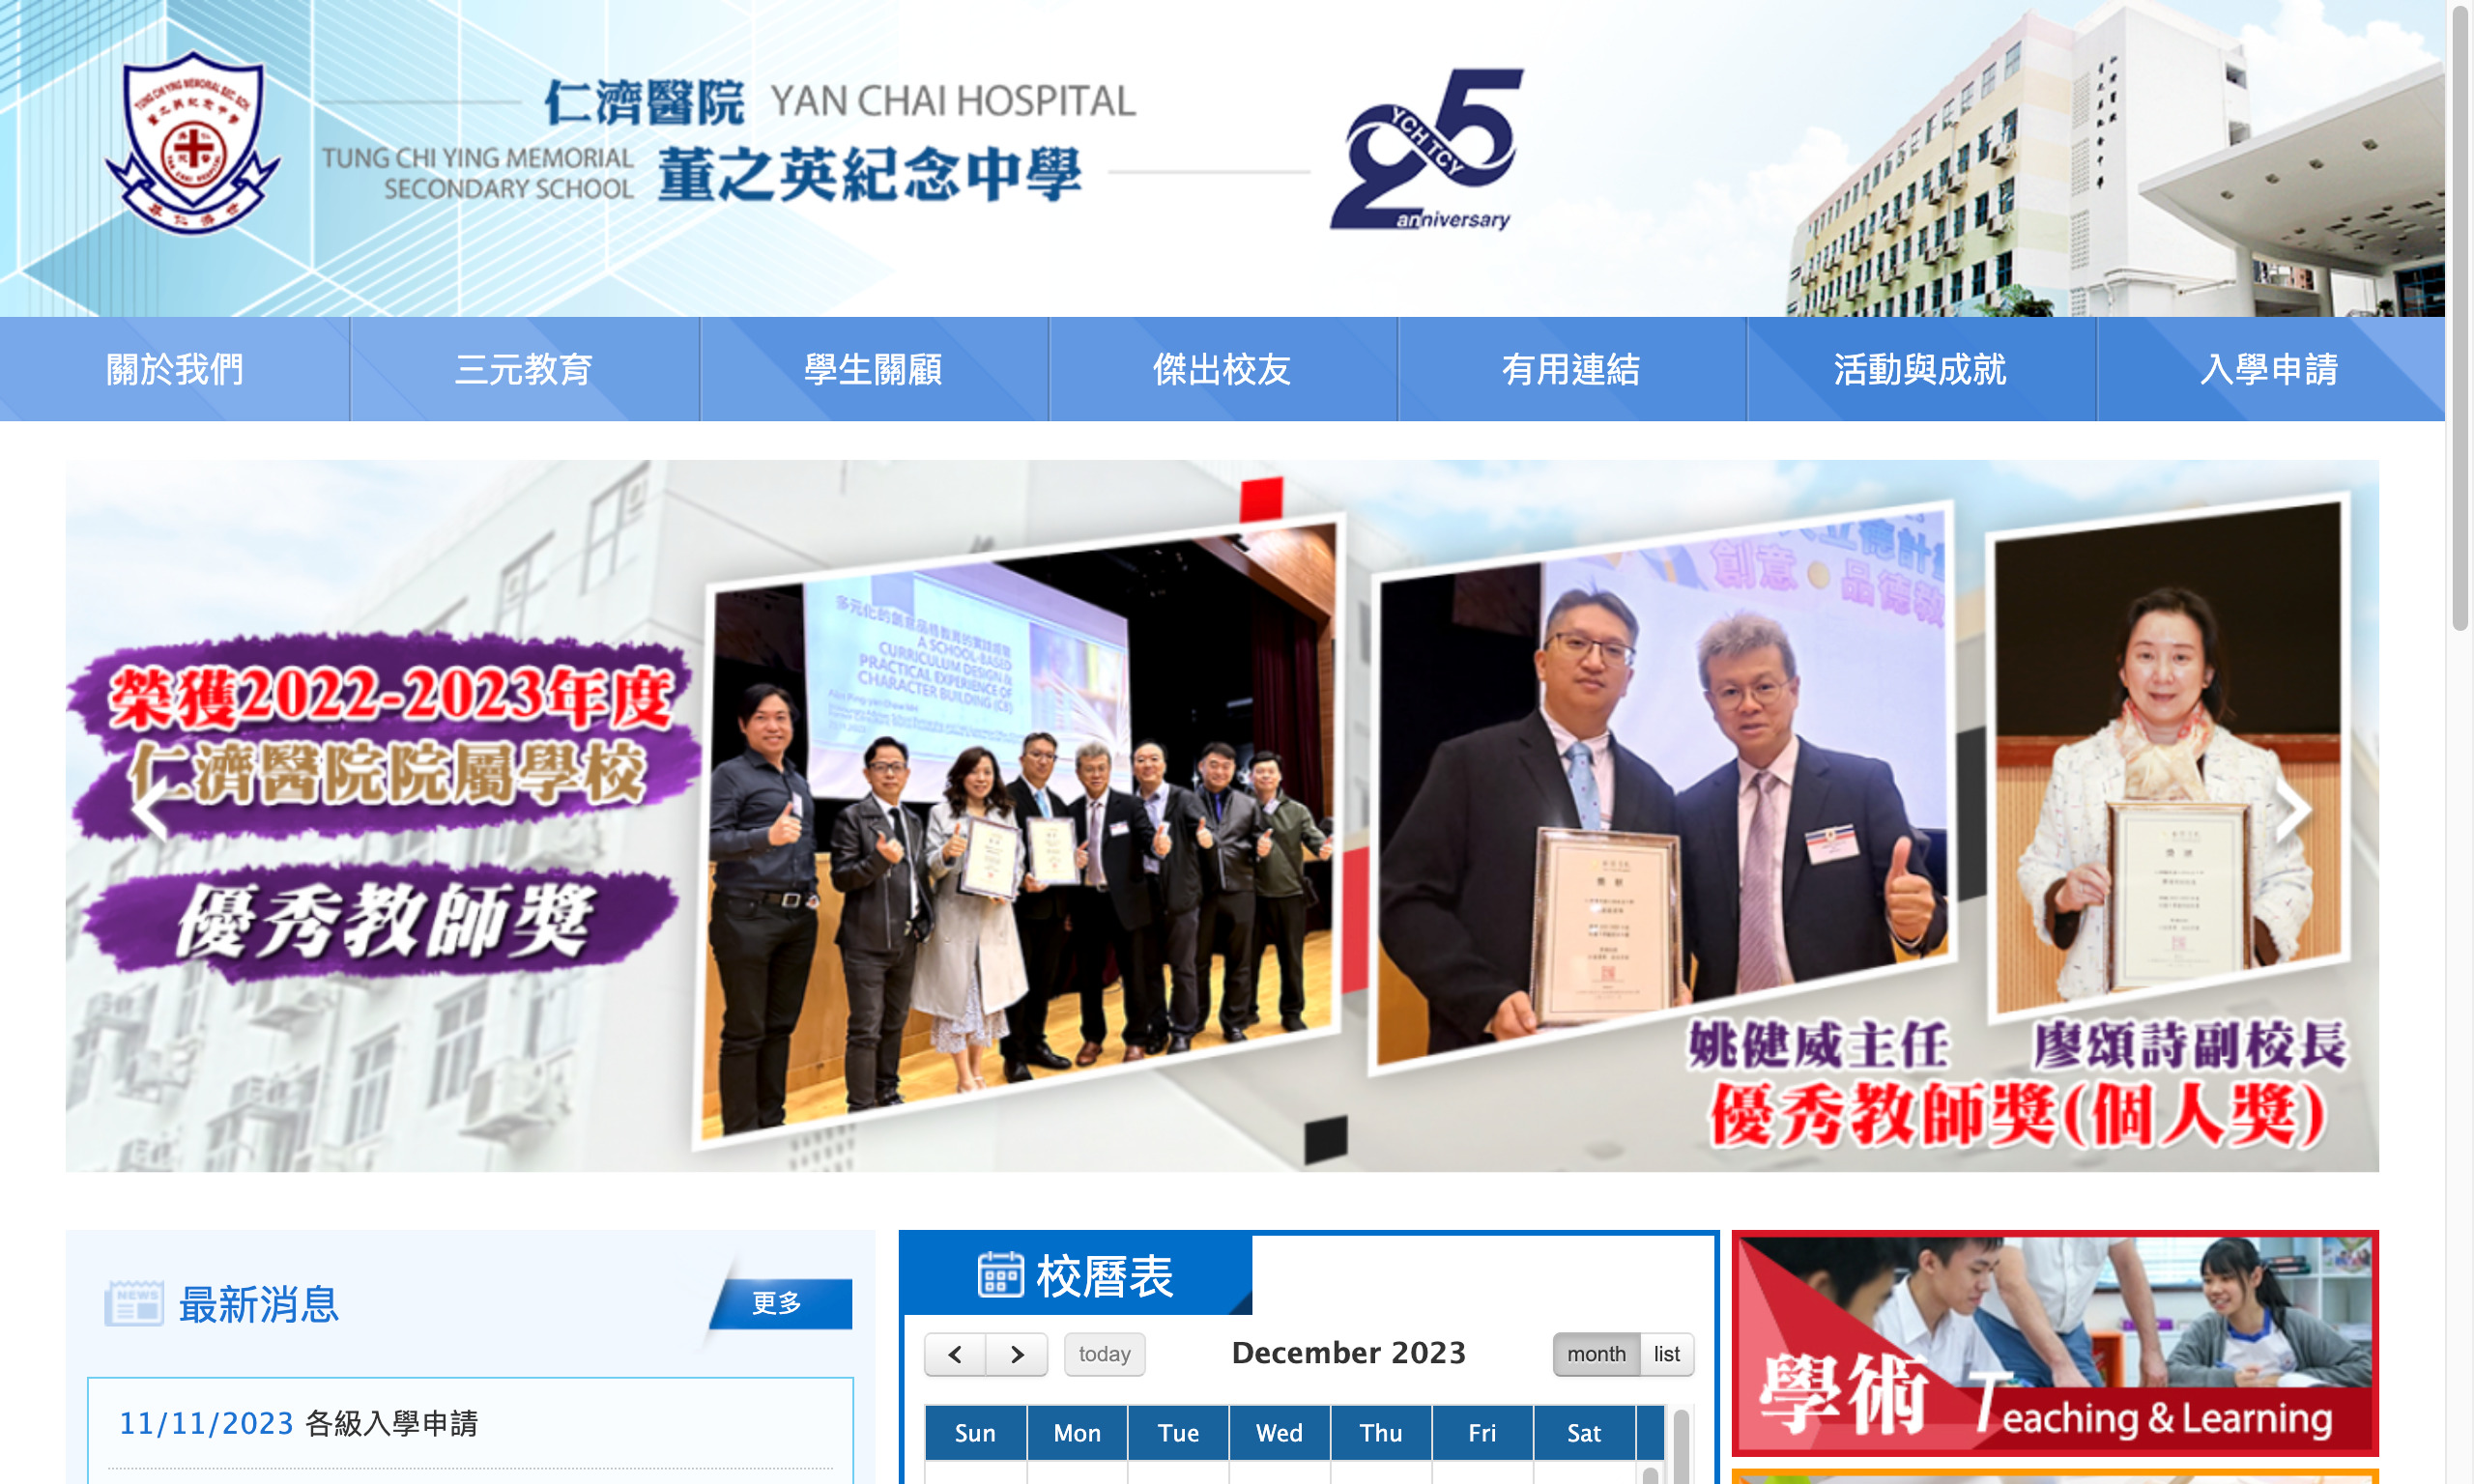 Screenshot of the Home Page of Yan Chai Hospital Tung Chi Ying Memorial Secondary School